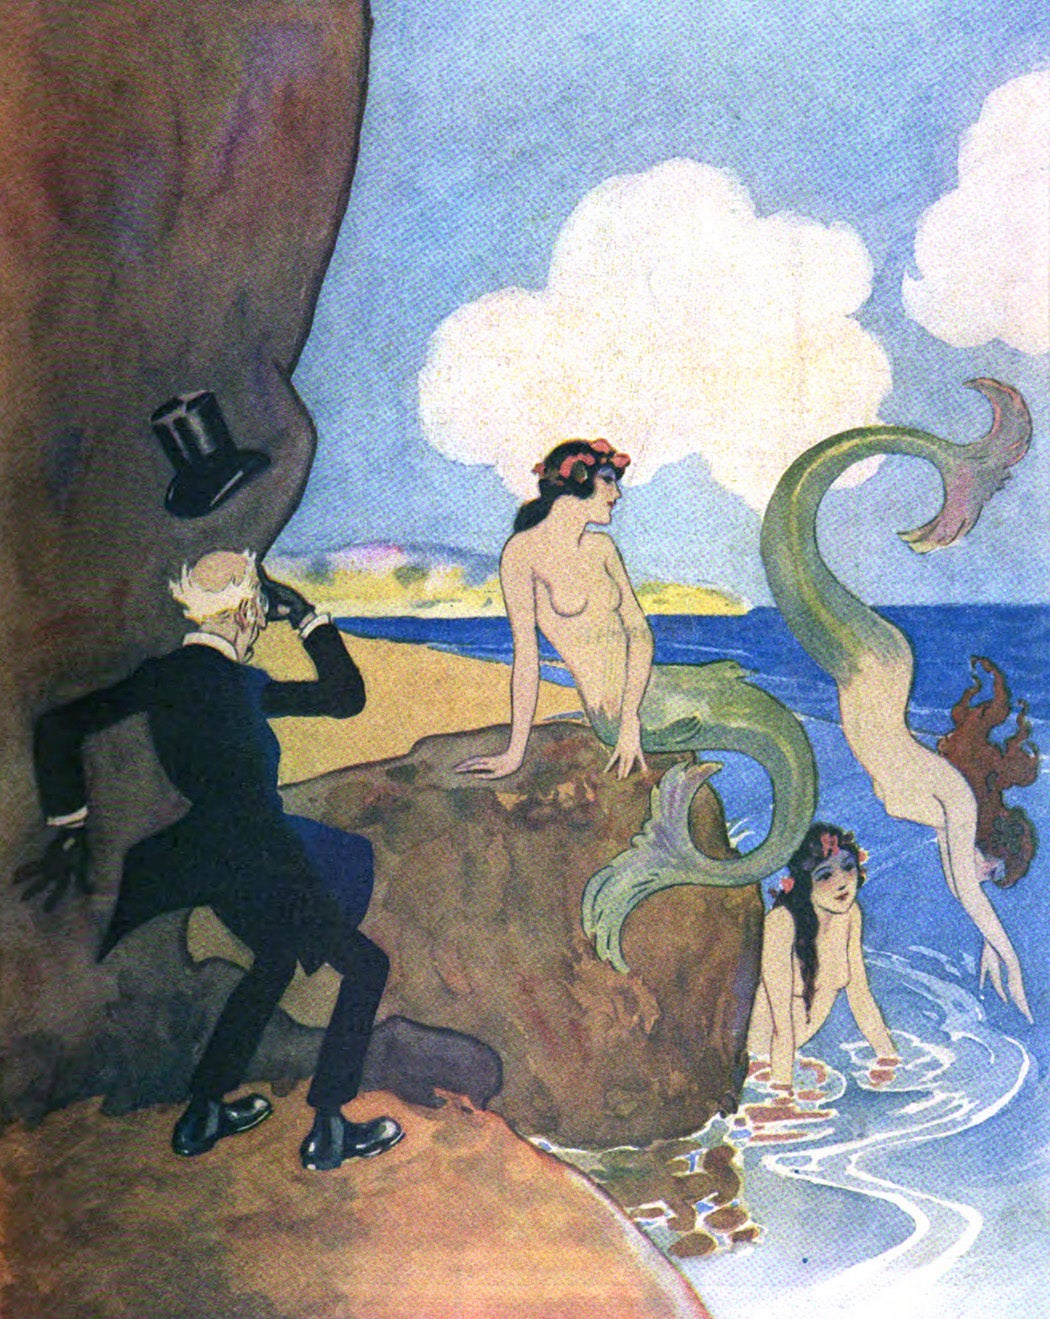 An illustration of a man happening upon three mermaids from the cover of Judge Magazine, 1921